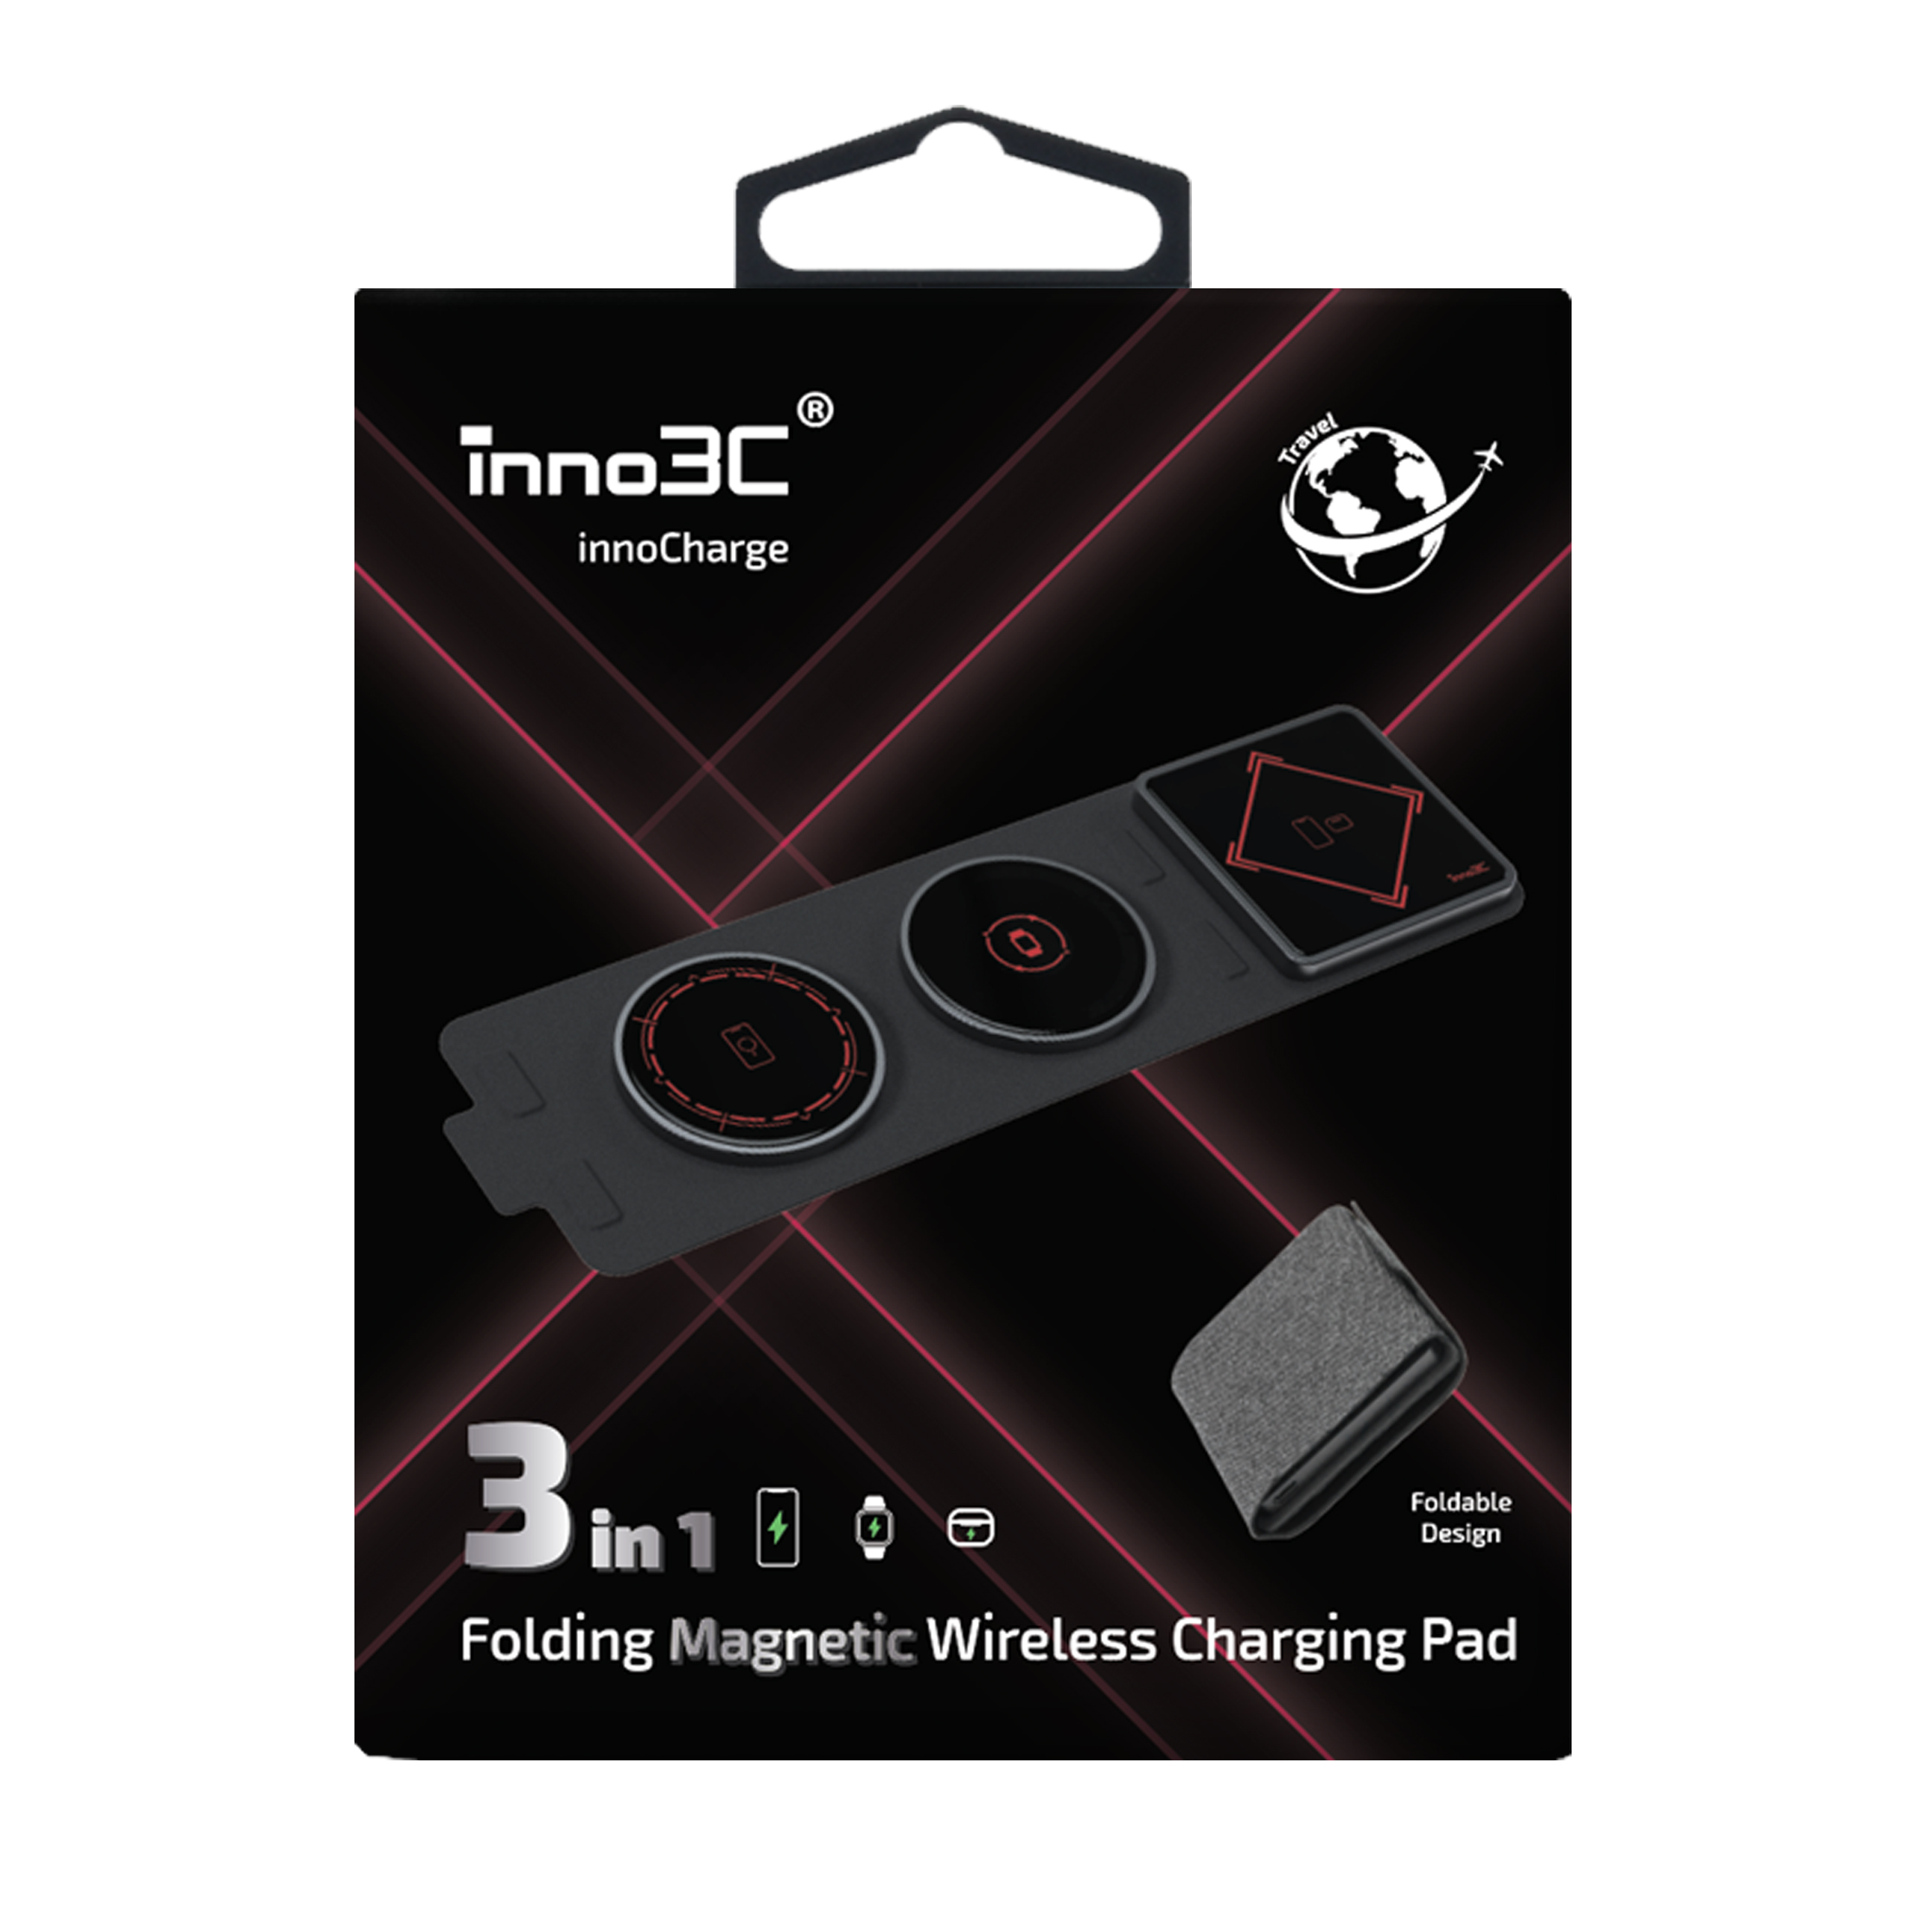 inno3C i-WAP3 3 in 1 Folding Magnetic Wireless Charging Pad, , large image number 4